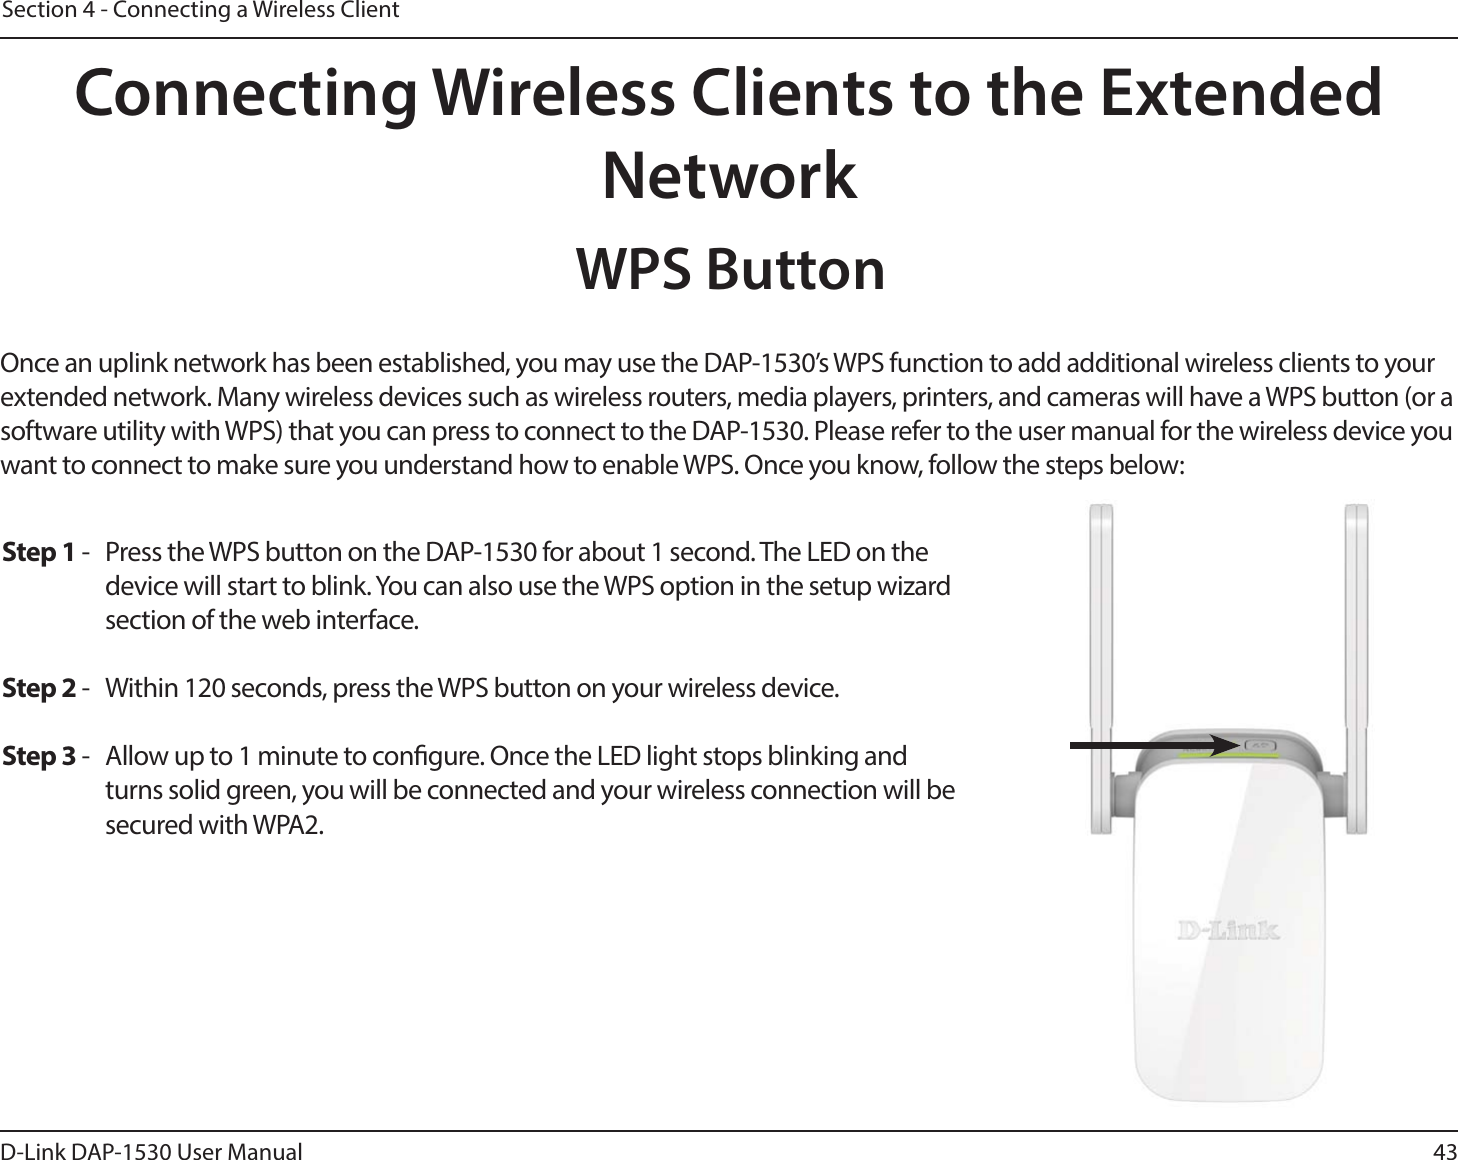 43D-Link DAP-1530 User ManualSection 4 - Connecting a Wireless ClientConnecting Wireless Clients to the Extended NetworkWPS ButtonOnce an uplink network has been established, you may use the DAP-1530’s WPS function to add additional wireless clients to your extended network. Many wireless devices such as wireless routers, media players, printers, and cameras will have a WPS button (or a software utility with WPS) that you can press to connect to the DAP-1530. Please refer to the user manual for the wireless device you want to connect to make sure you understand how to enable WPS. Once you know, follow the steps below:Step 1 -  Press the WPS button on the DAP-1530 for about 1 second. The LED on the device will start to blink. You can also use the WPS option in the setup wizard section of the web interface. Step 2 -  Within 120 seconds, press the WPS button on your wireless device.Step 3 -  Allow up to 1 minute to congure. Once the LED light stops blinking and turns solid green, you will be connected and your wireless connection will be secured with WPA2.p